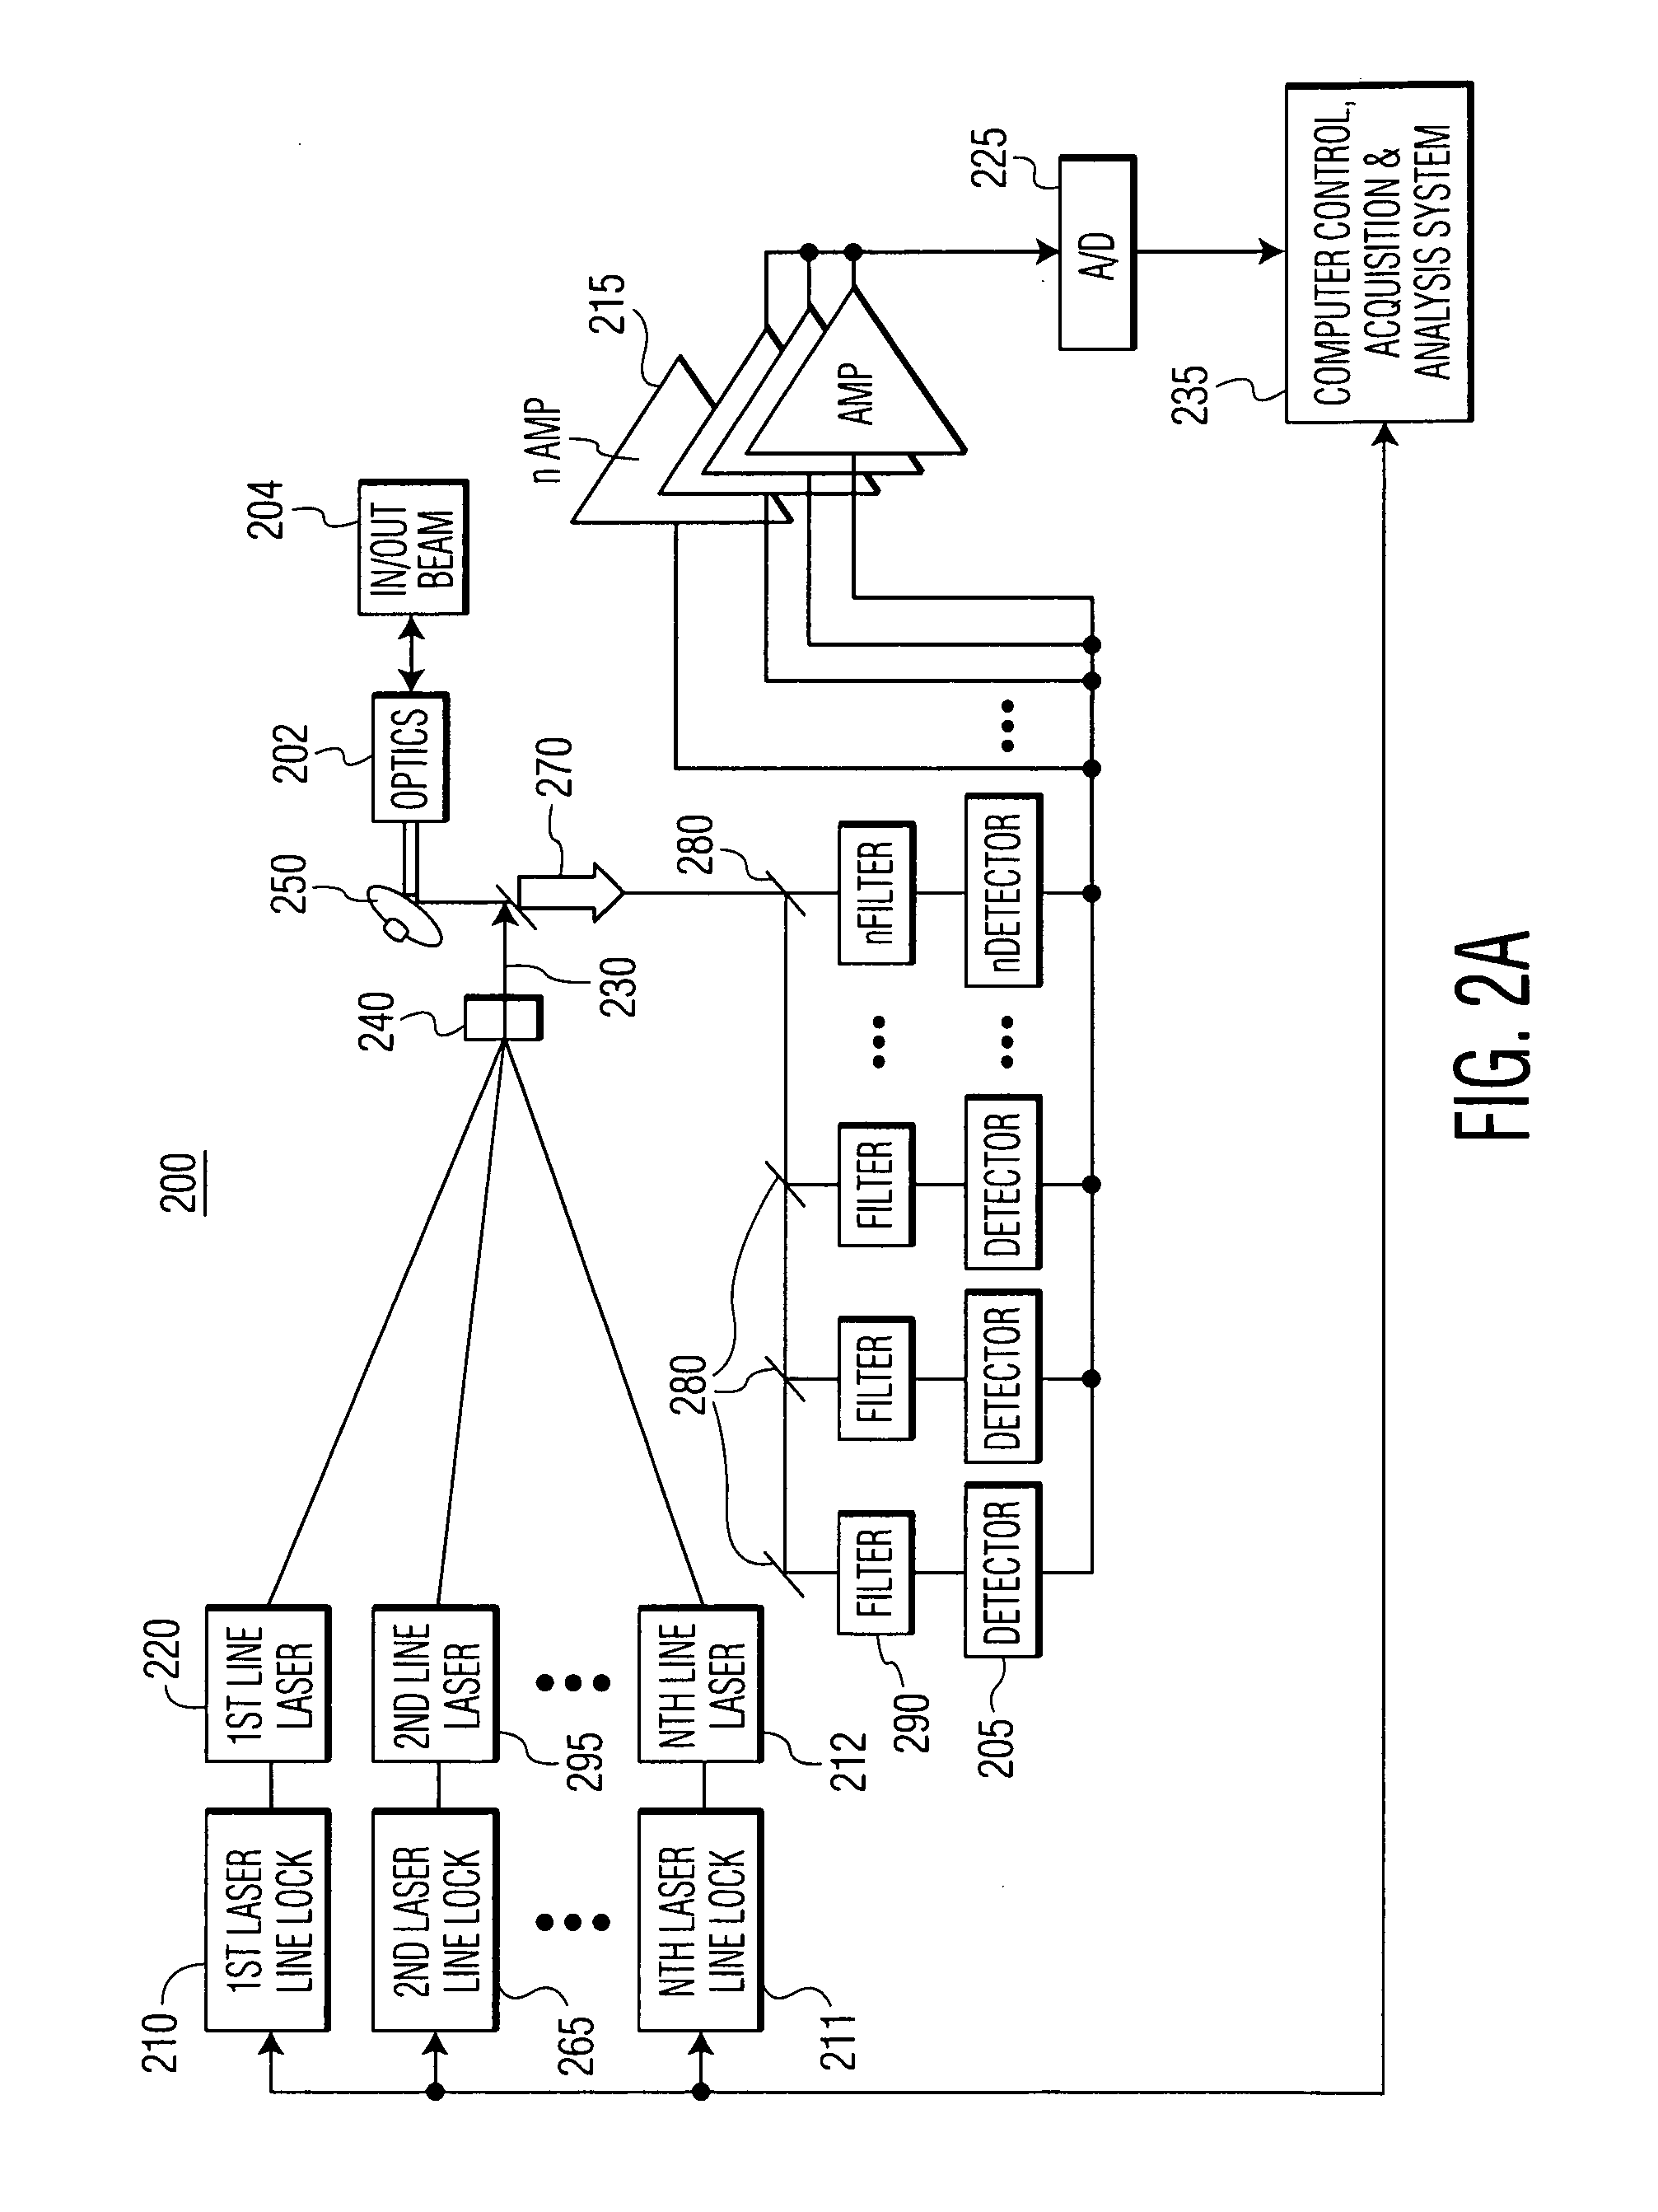 Multi-line tunable laser system